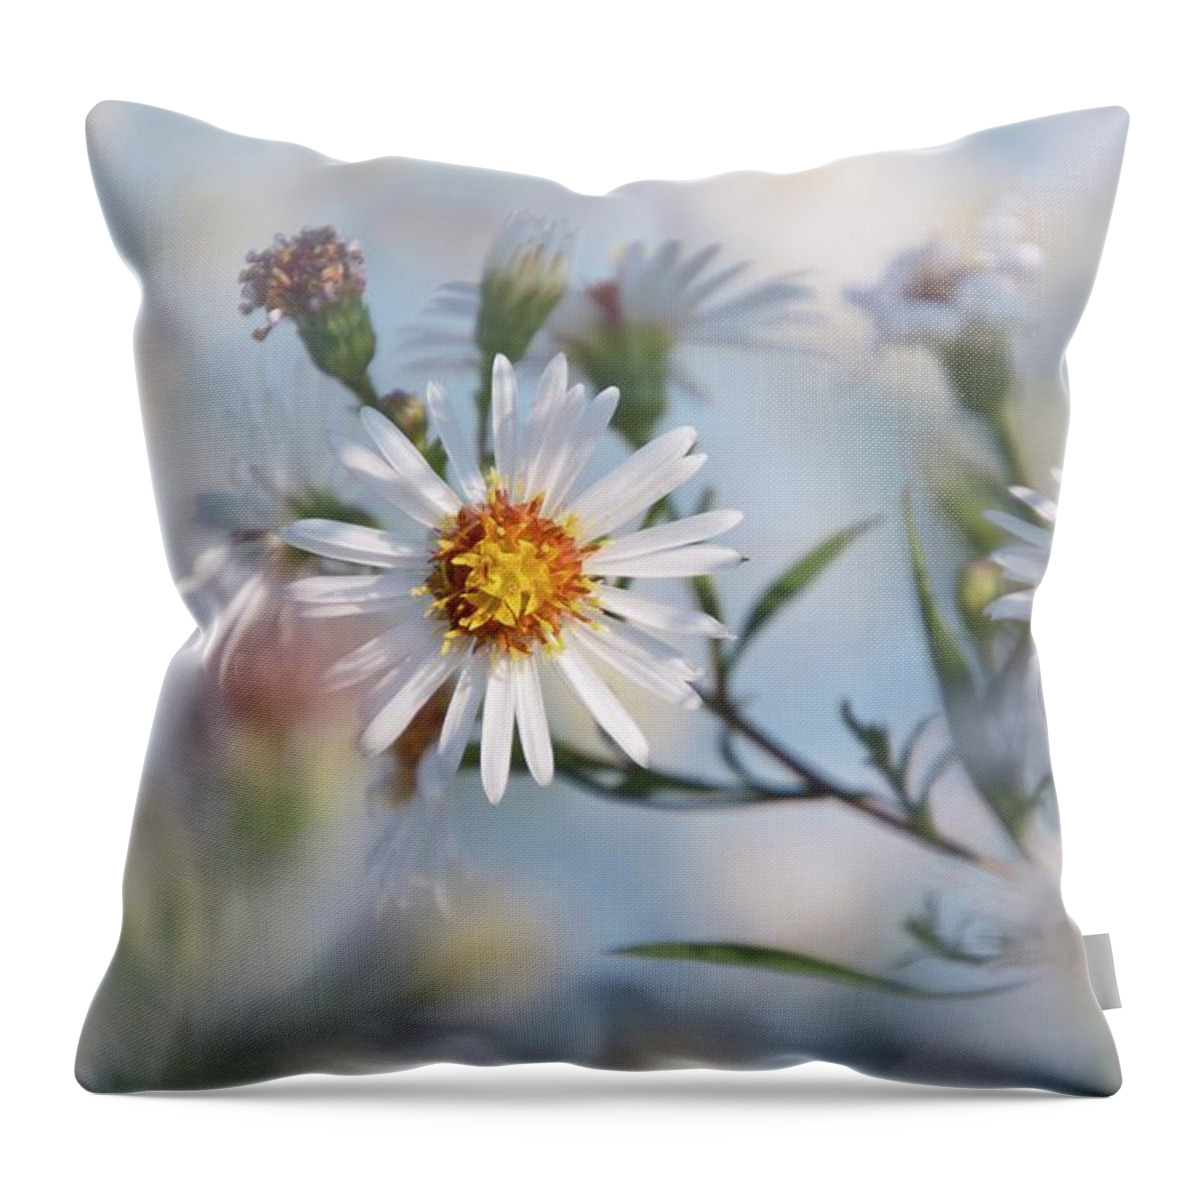 Flower Throw Pillow featuring the photograph Touches 4 by Jaroslav Buna